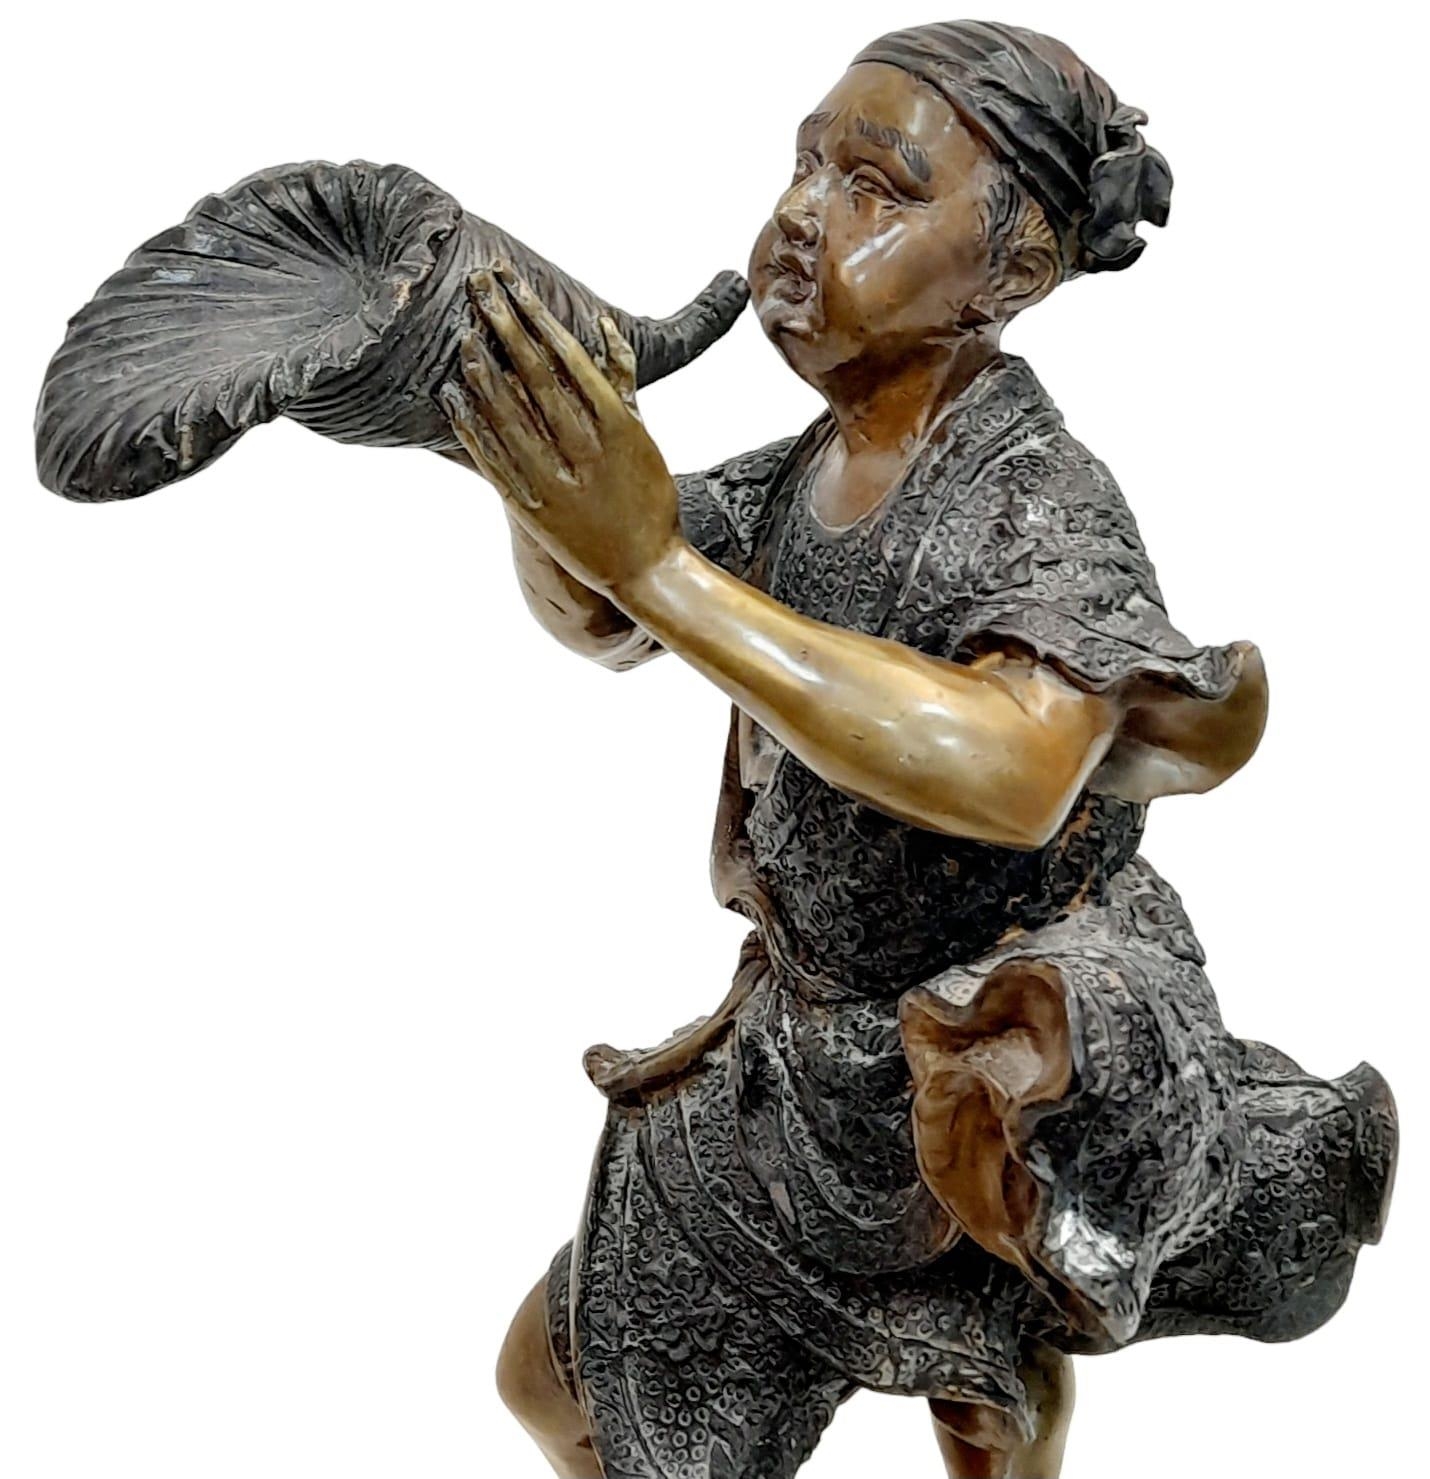 A Magnificent Large Antique Japanese Edo Period Okimono Bronze Statue Depicting a Young Man - Image 3 of 4